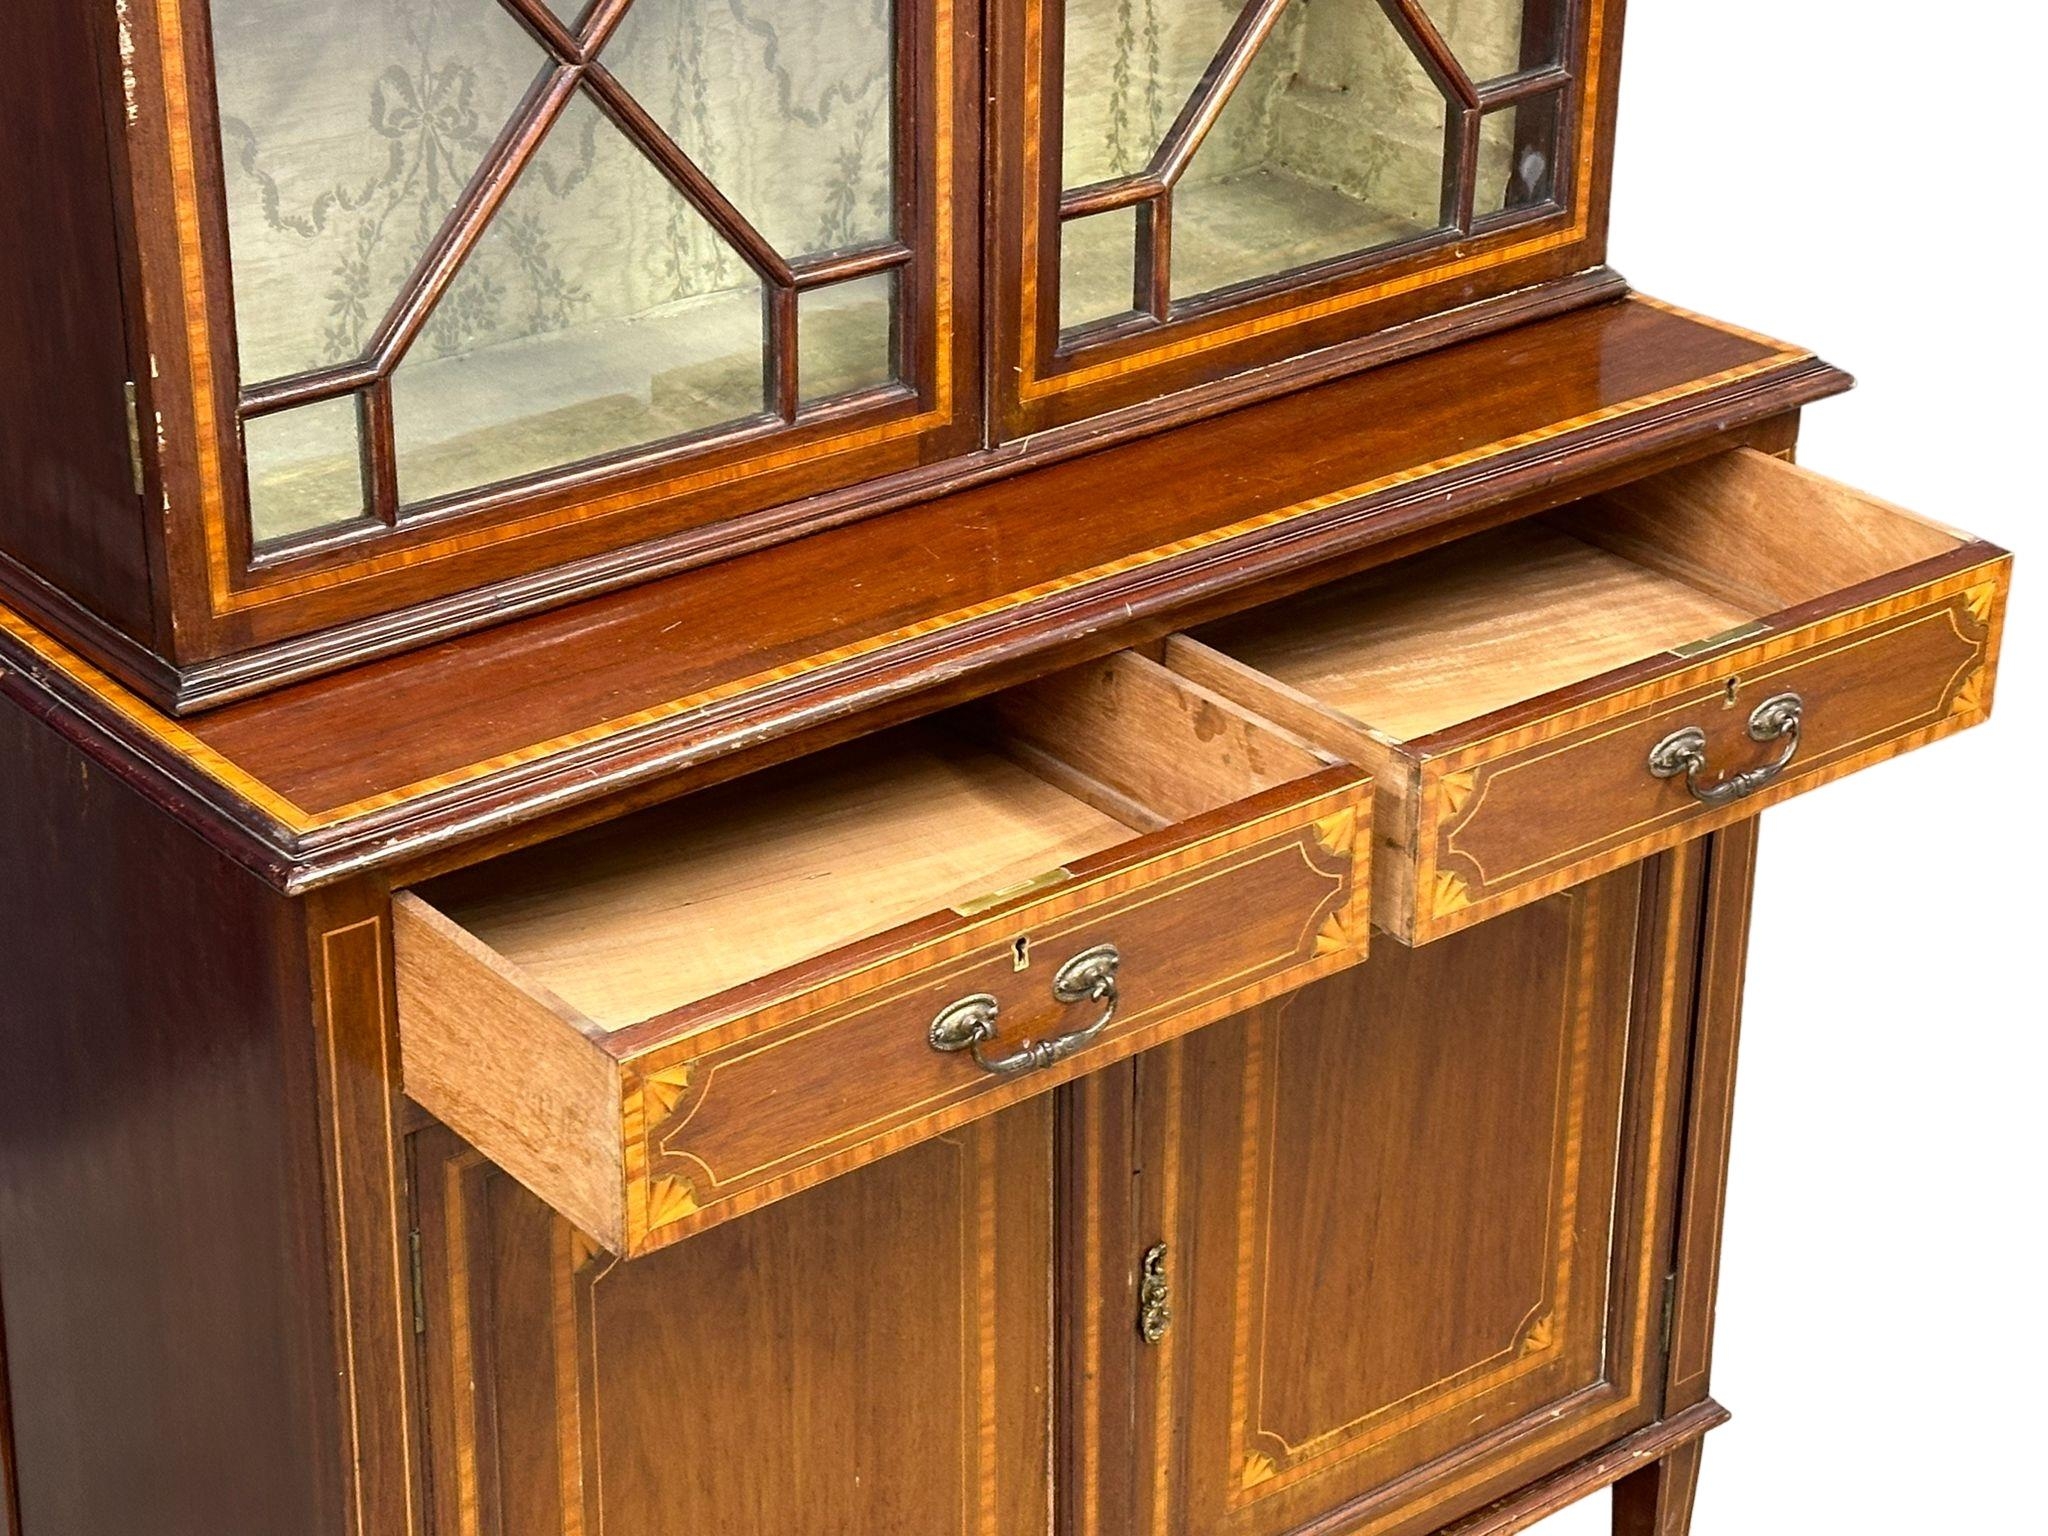 An early 20th Century Sheraton Revival Inlaid mahogany bookcase with 2 drawers - Image 7 of 9